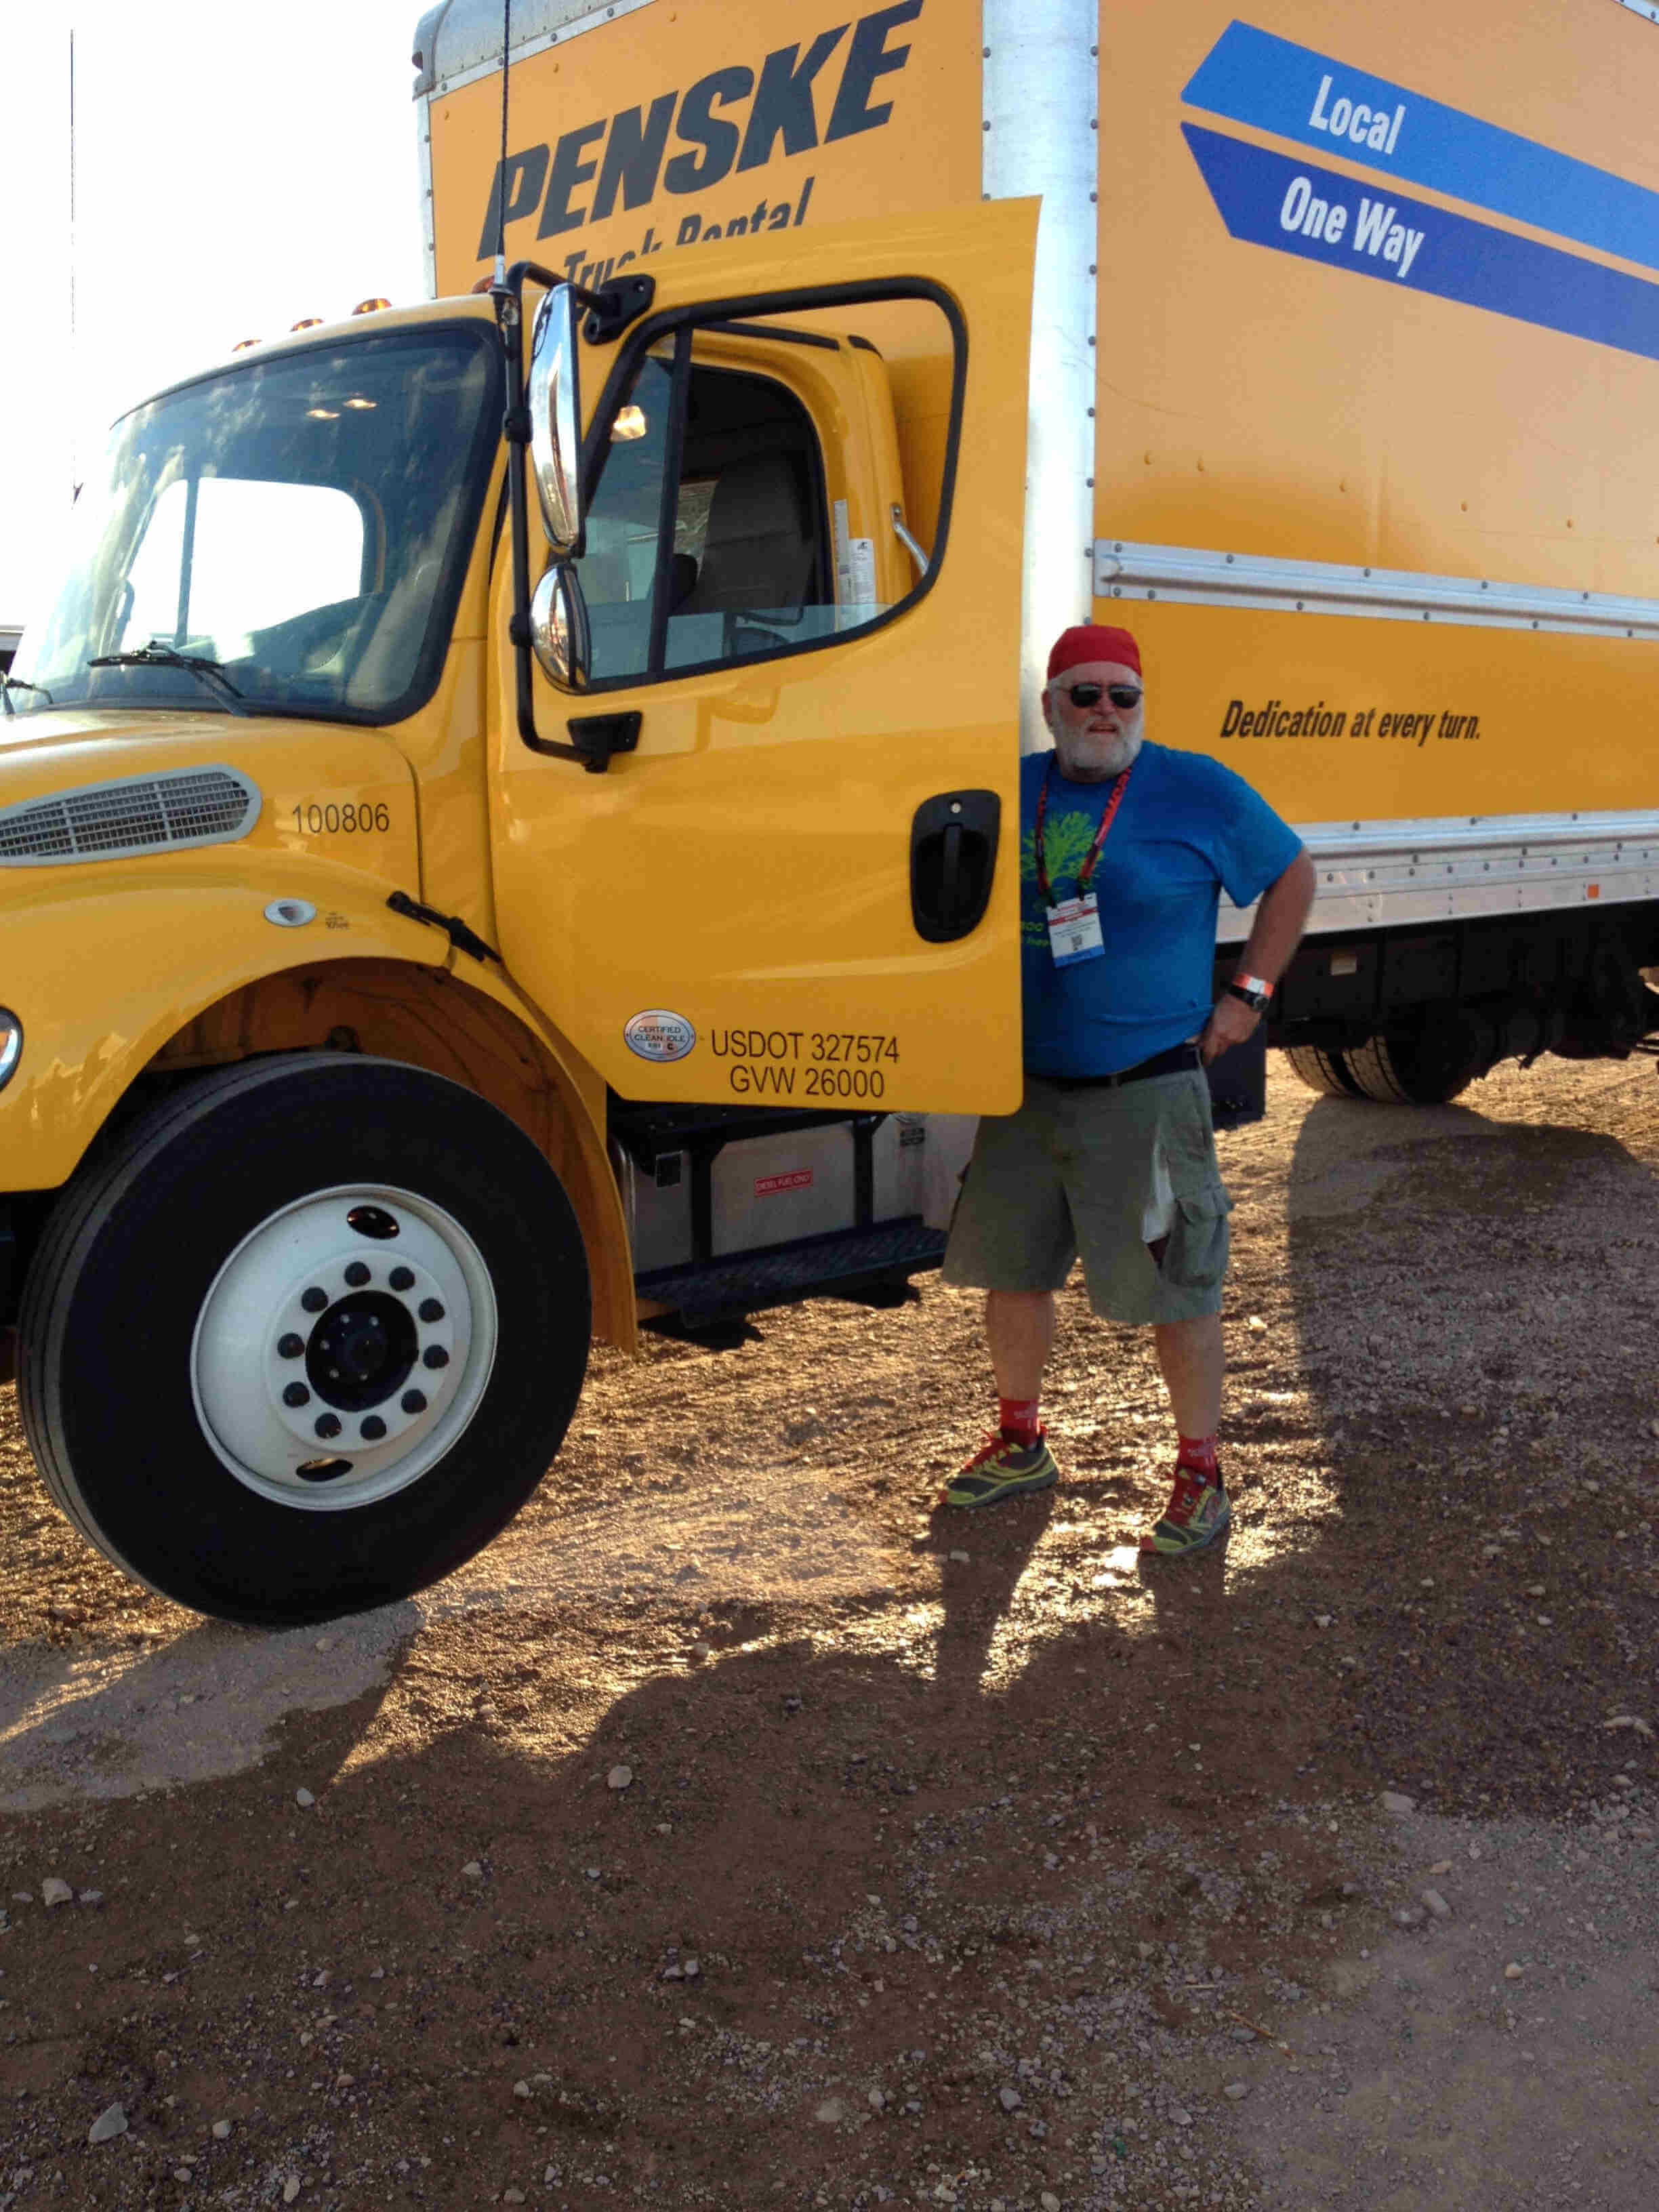 A person standing next to an open door on the left side of a yellow Penske moving truck